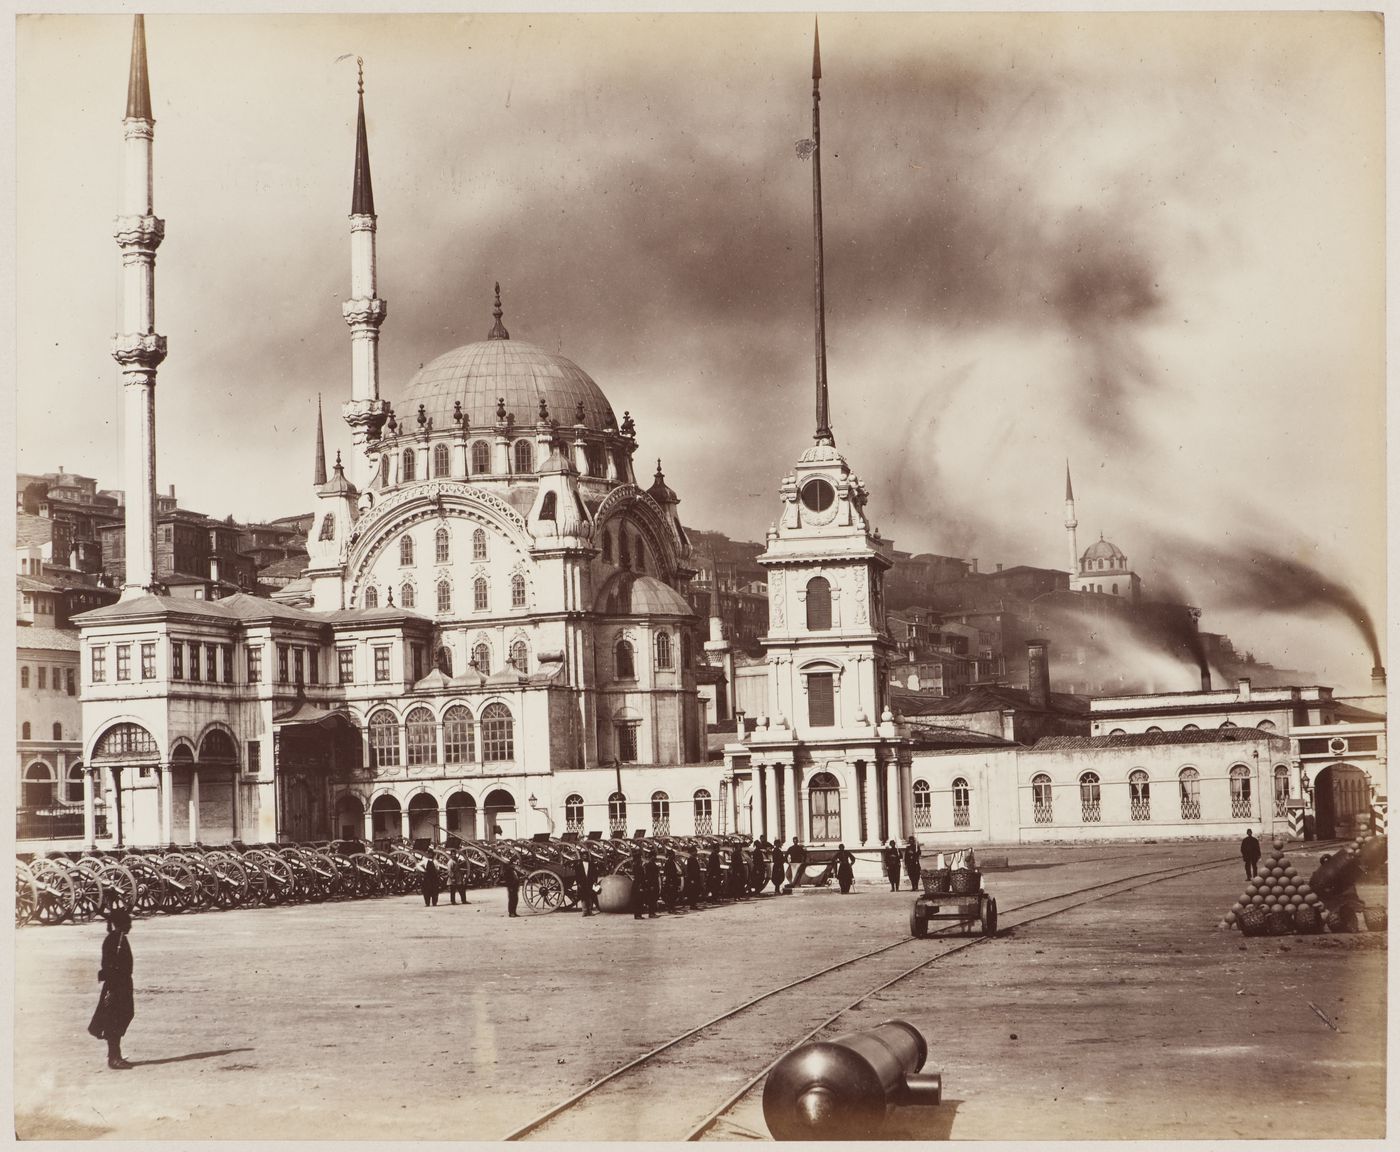 View of the Nusretiye Camii [Victory Mosque] (also known as the Tophane Mosque) with soldiers, artillery and rails in the foreground and a military building in the right background, Constantinople (now Istanbul), Ottoman Empire (now in Turkey)